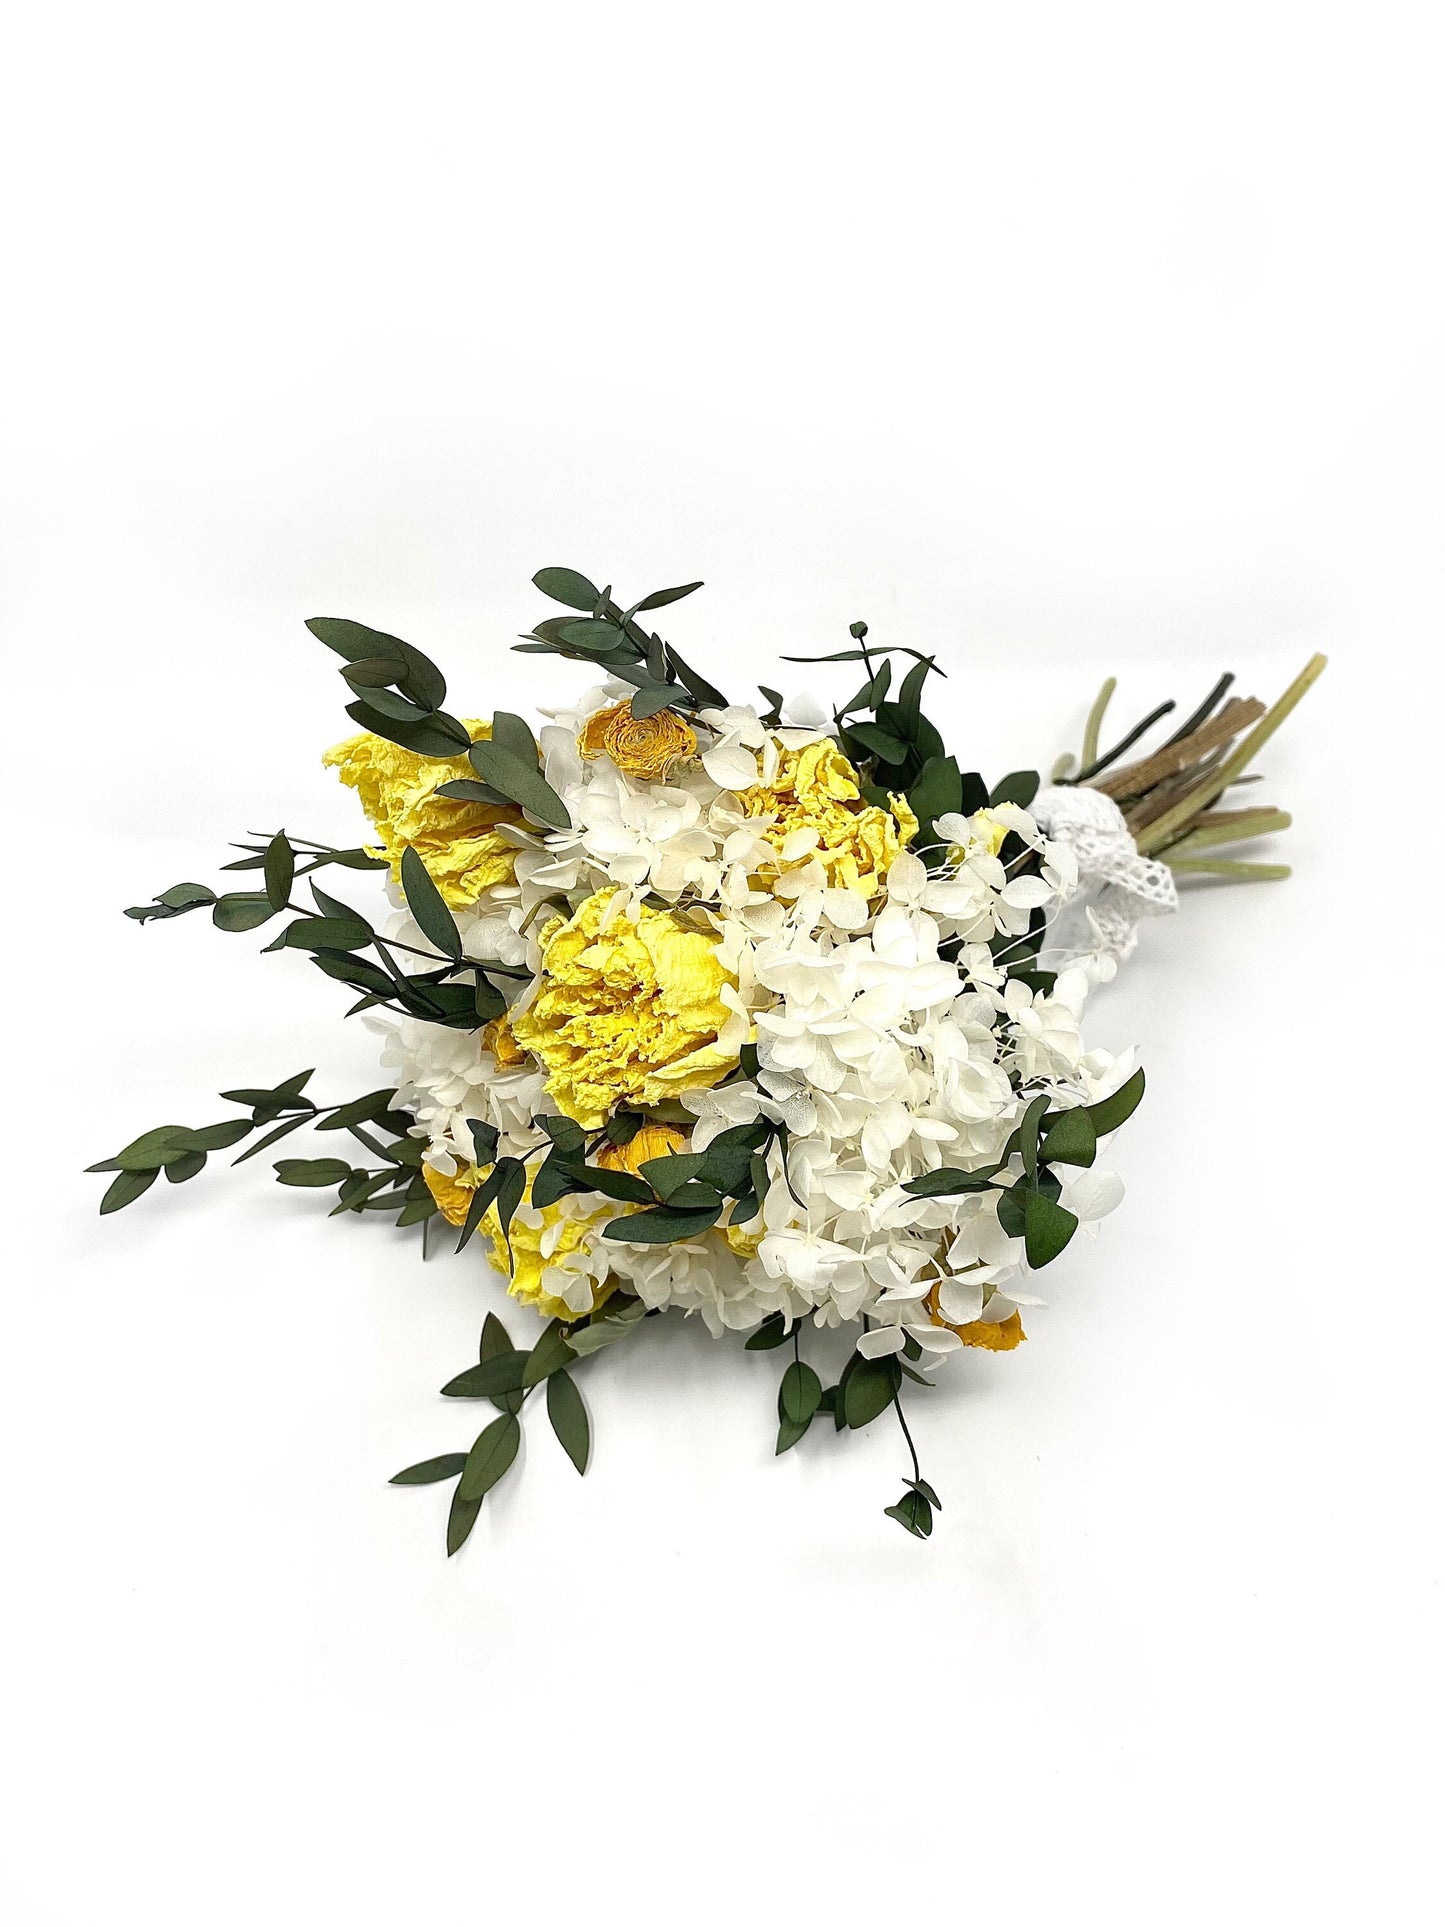 Yellow Bouquet, Wedding Flowers, Dried Florals, Yellow and White, Throw Bouquet, Peonies, Greenery, Summer Florals, Hydrangeas, Bridal